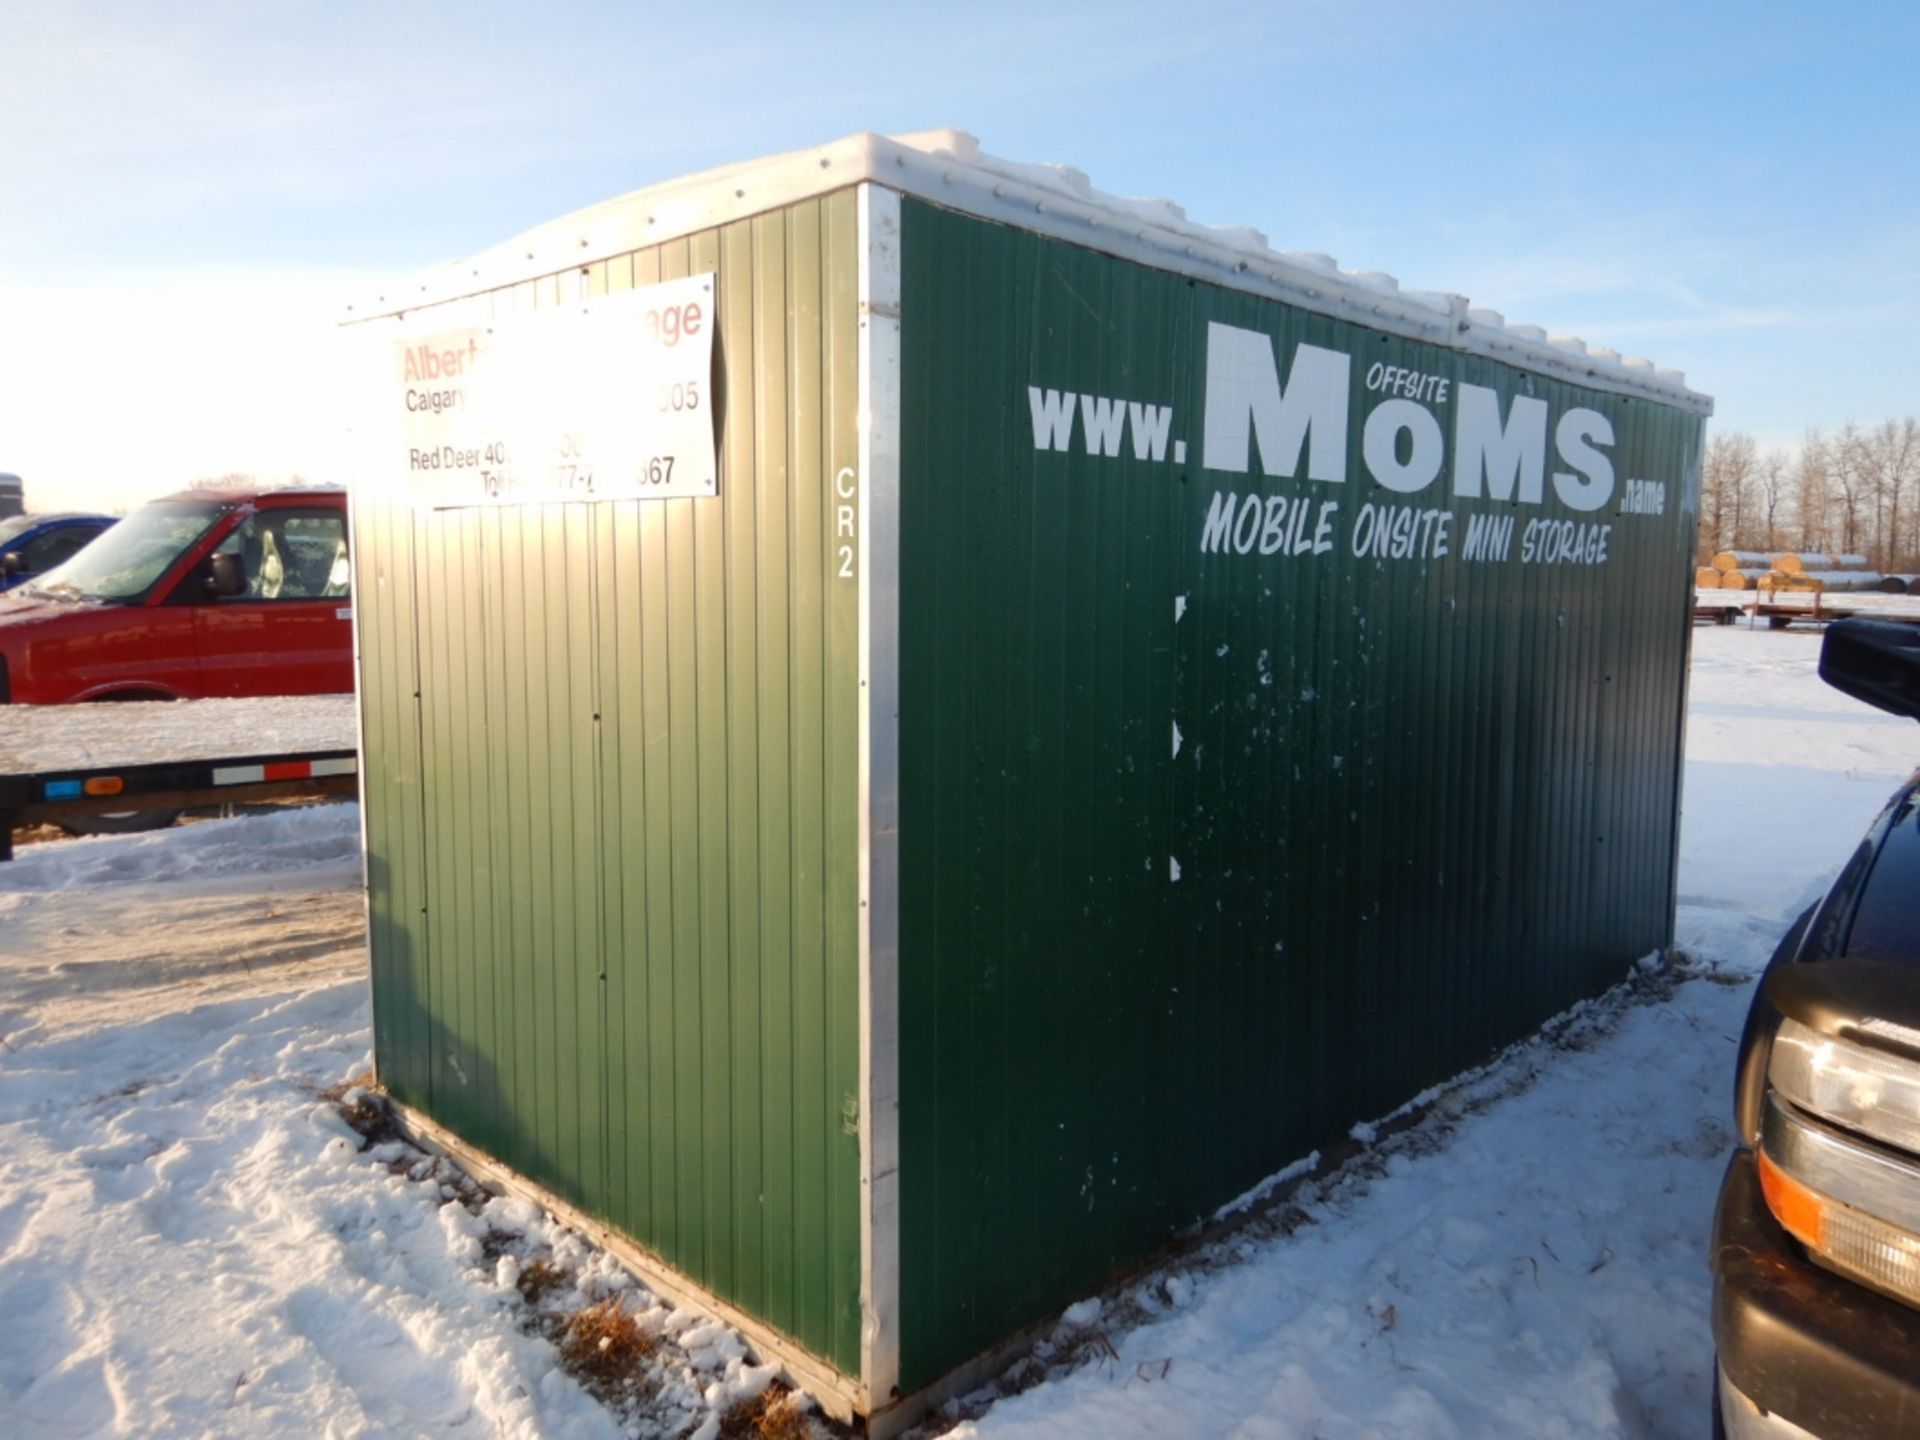 7'X 14' MOBILE ON-SITE MINI MOBILE STORAGE UNIT S/N CR2 - Image 2 of 3